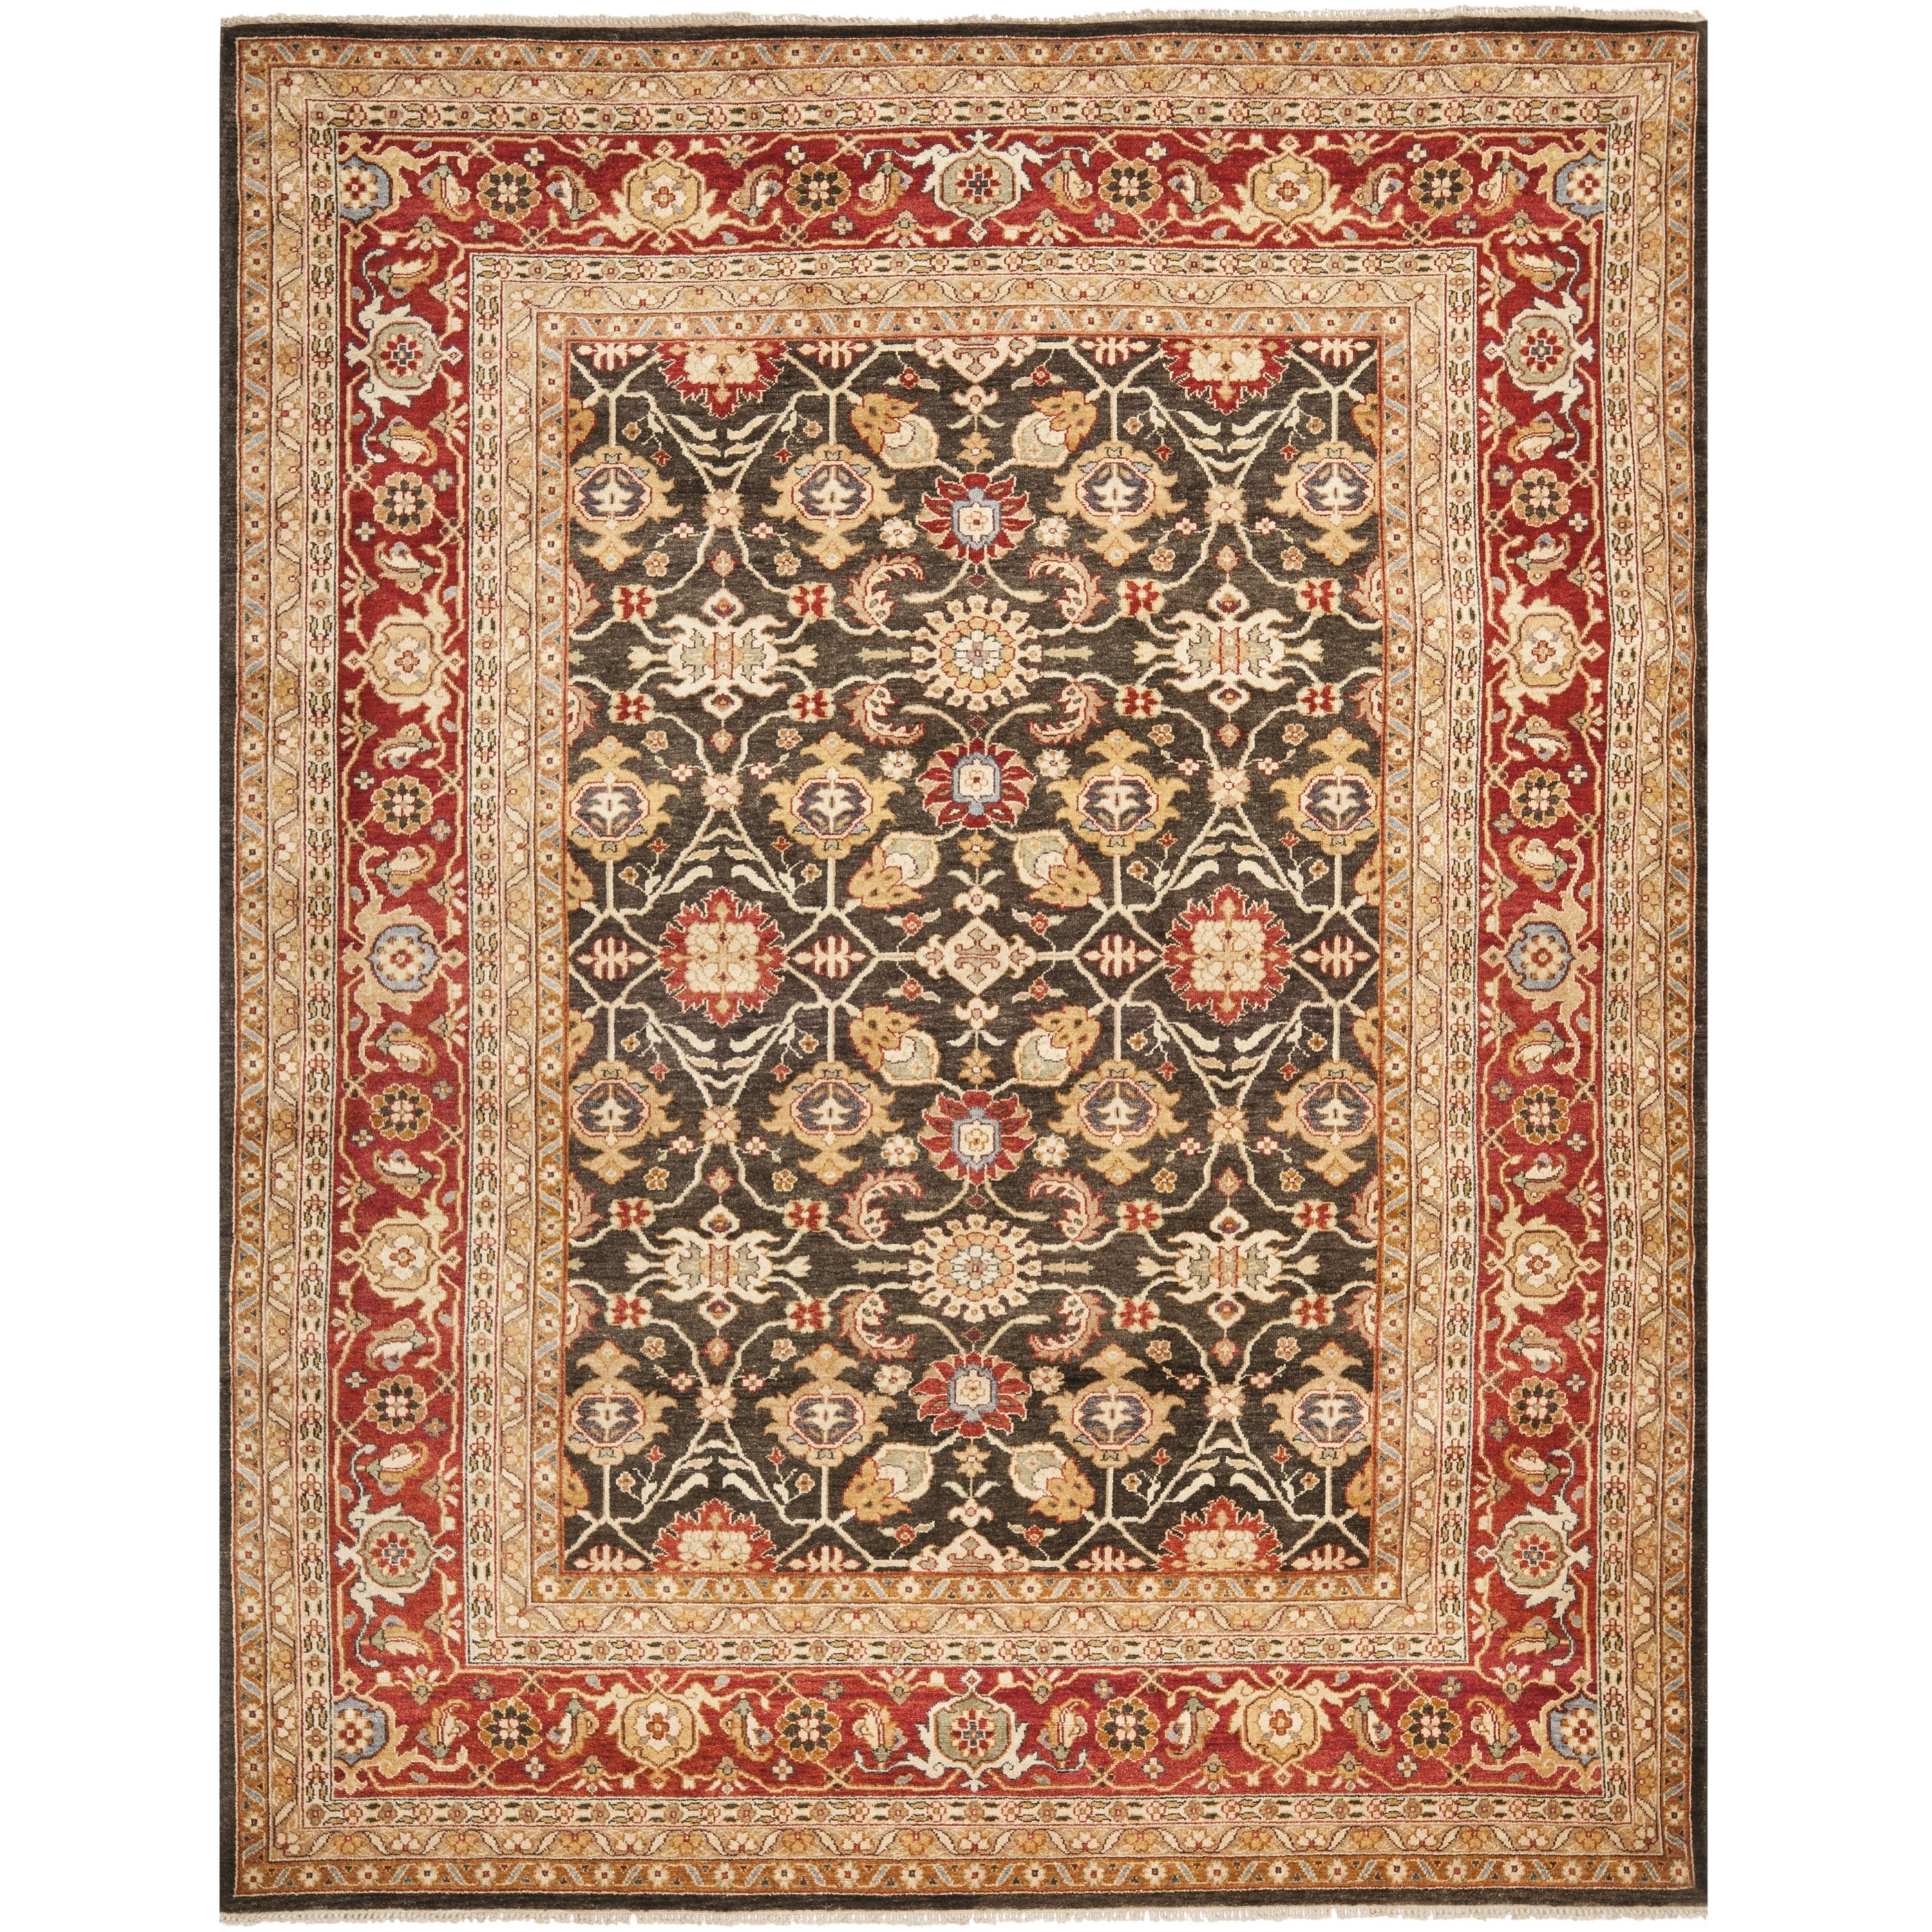 Safavieh Hand knotted Samarkand Green/ Red Wool Rug (6 X 9)